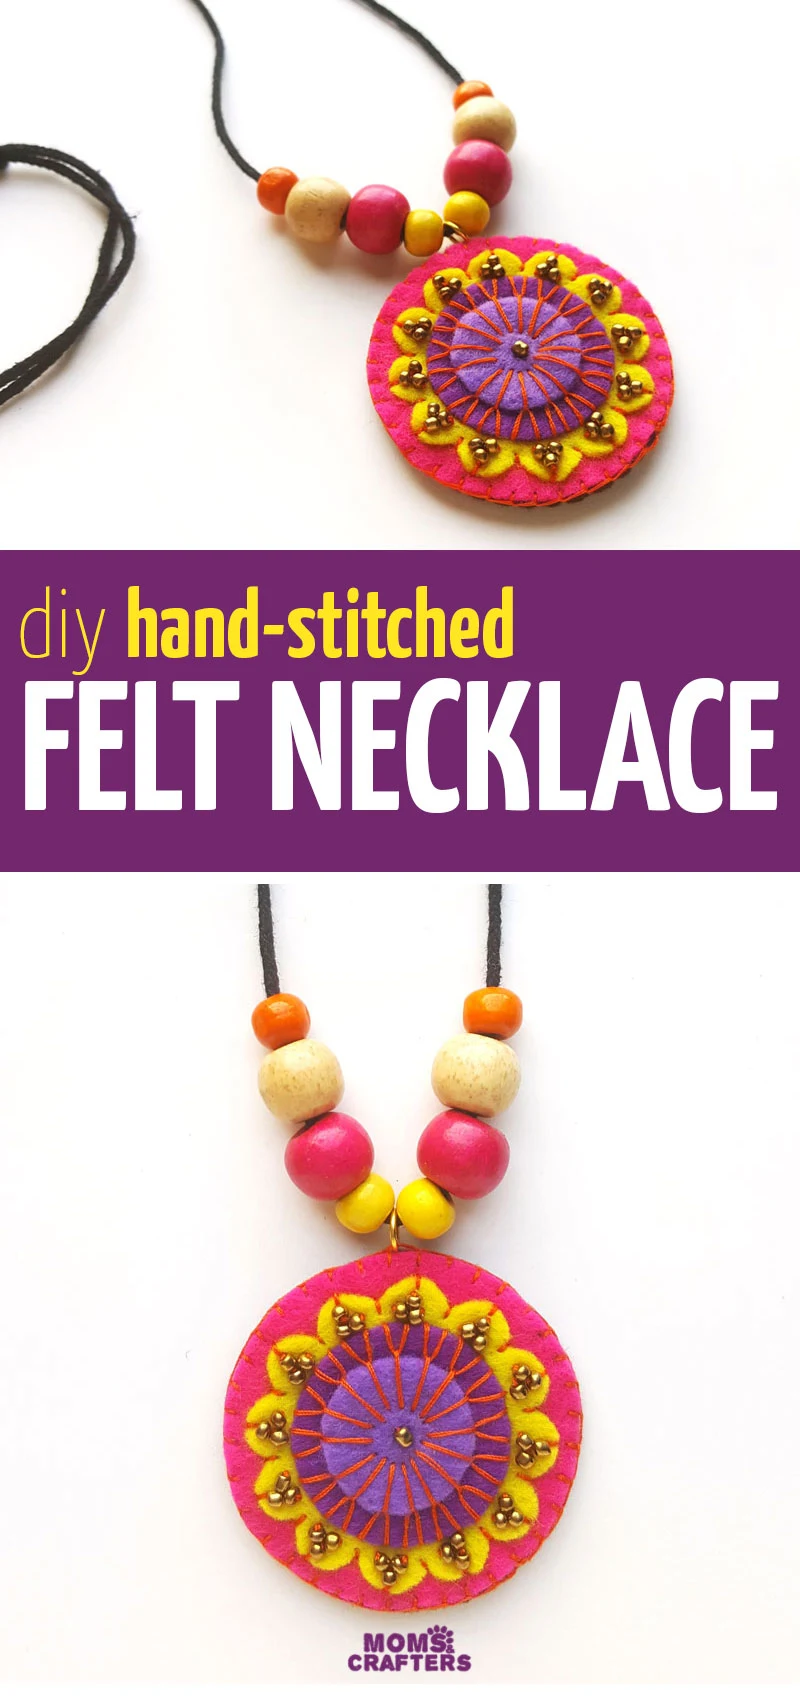 Click for the tutorial and template to make this fun colorful DIY felt necklace - you can hand stitch this beautiful sewing and jewelry making project for beginners! This is a fun jewellery craft tutorial for teens and tweens too!